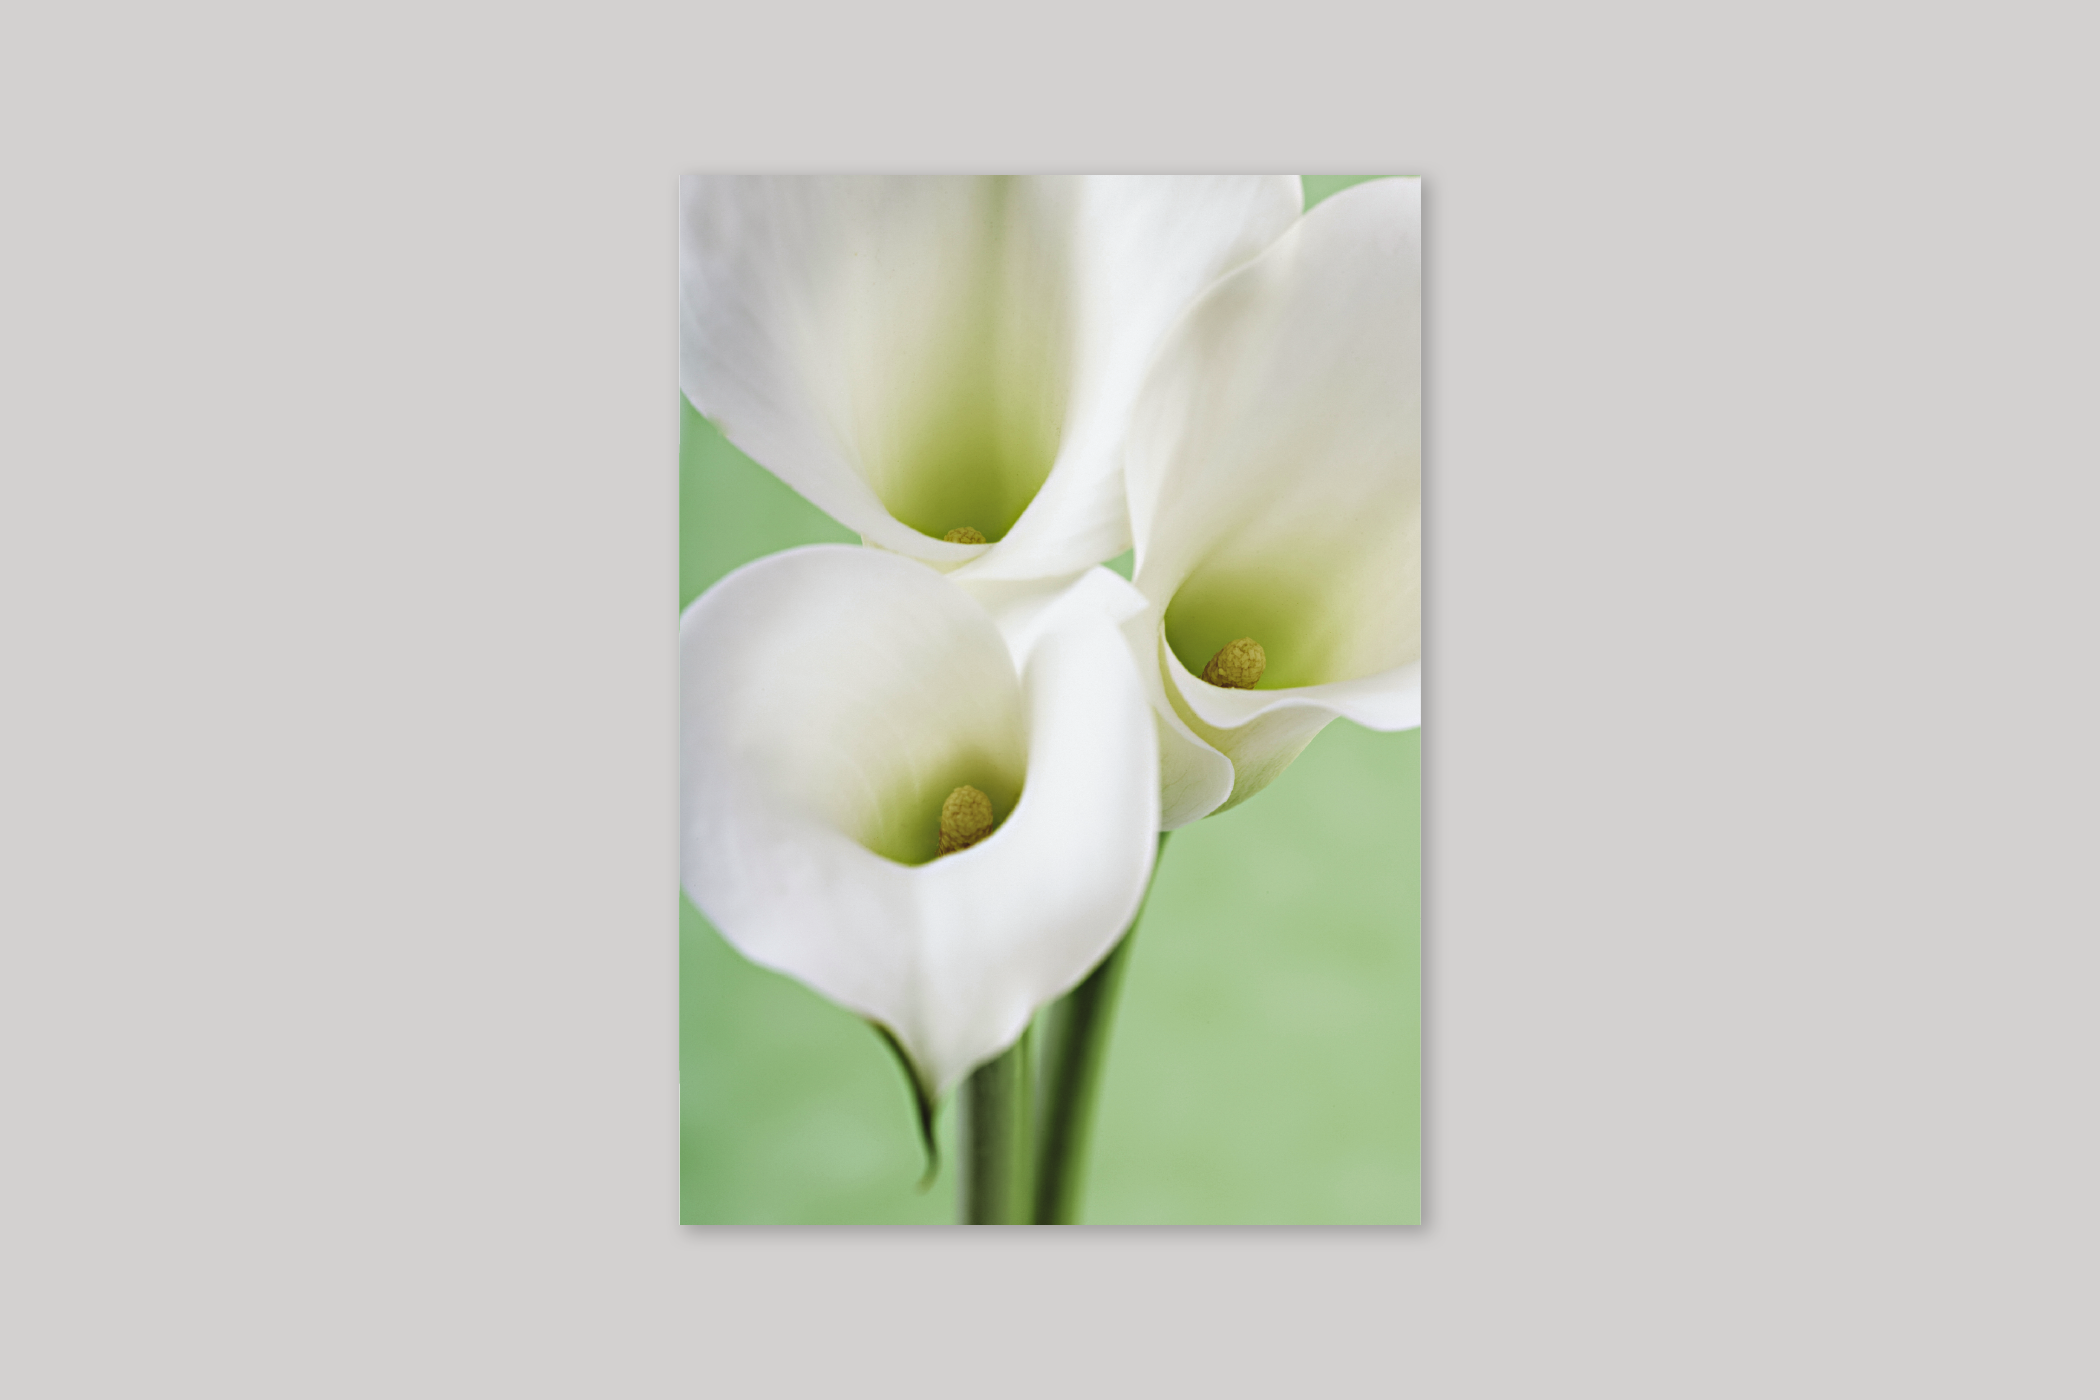 Calla Lilies sympathy card from Exposure range of photographic cards by Icon.